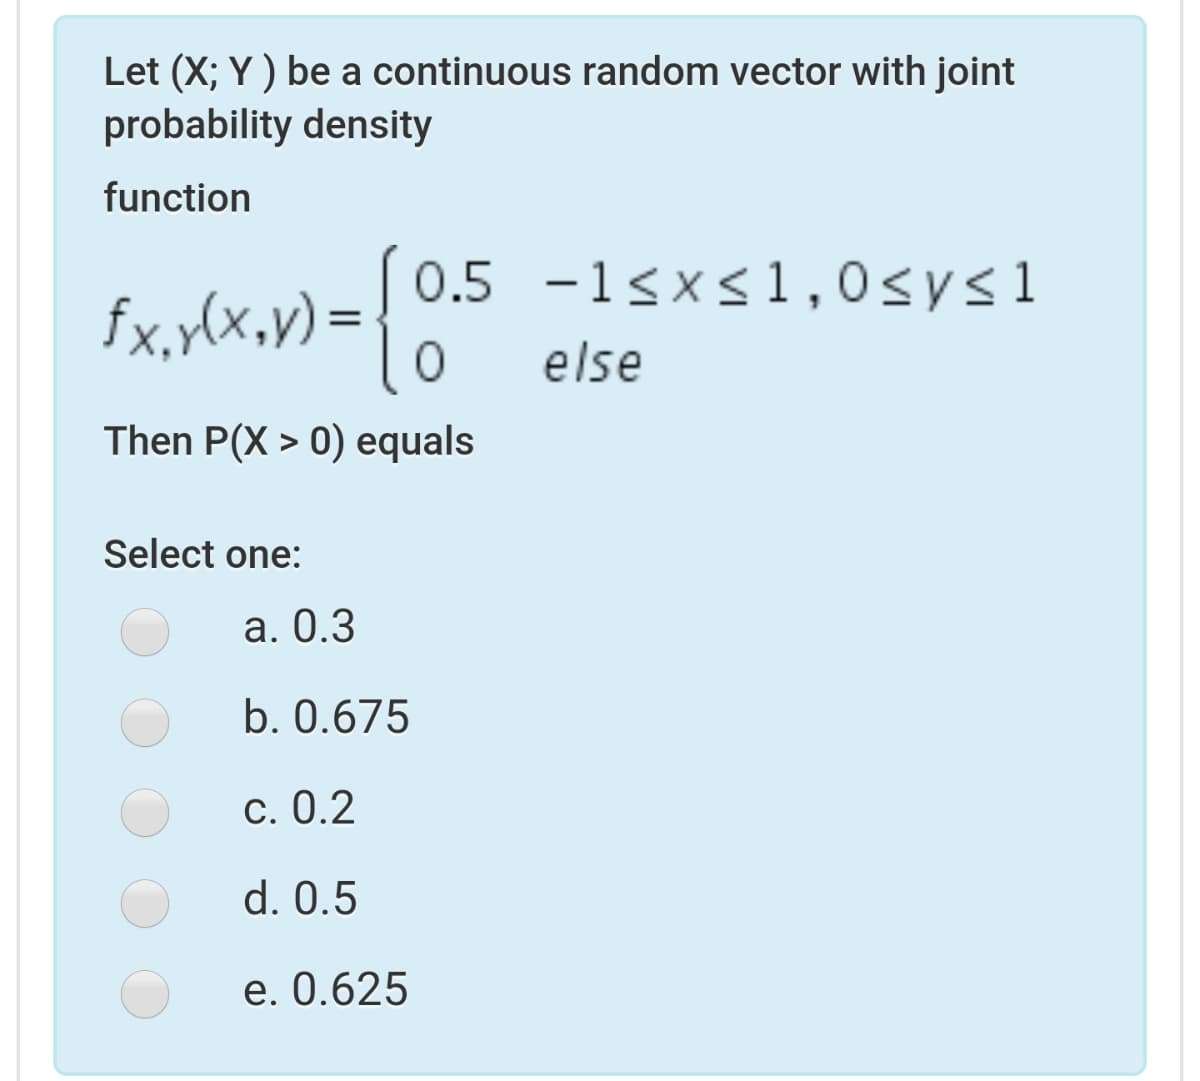 Let (X; Y ) be a continuous random vector with joint
probability density
function
0.5 -1sx<1,0sysl
fx,y(x,v) = { 0.S
else
Then P(X > 0) equals
Select one:
а. О.3
b. 0.675
С. 0.2
d. 0.5
e. 0.625
